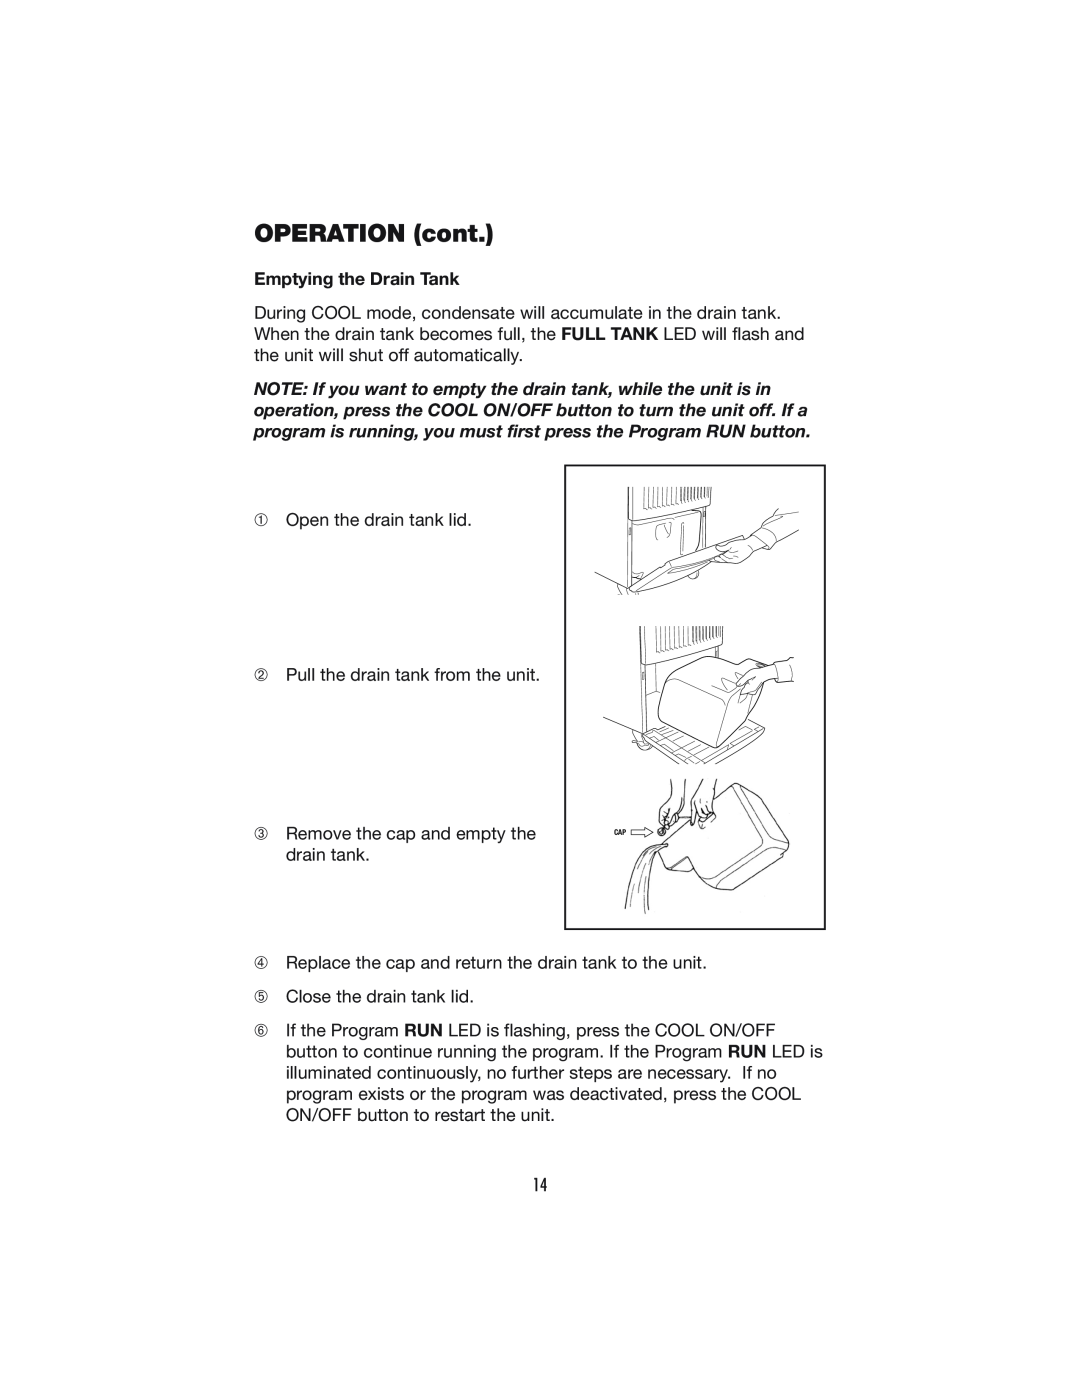 Denso OFFICE PRO 12, OFFICE PRO 24 operation manual Emptying the Drain Tank, OPERATION cont 